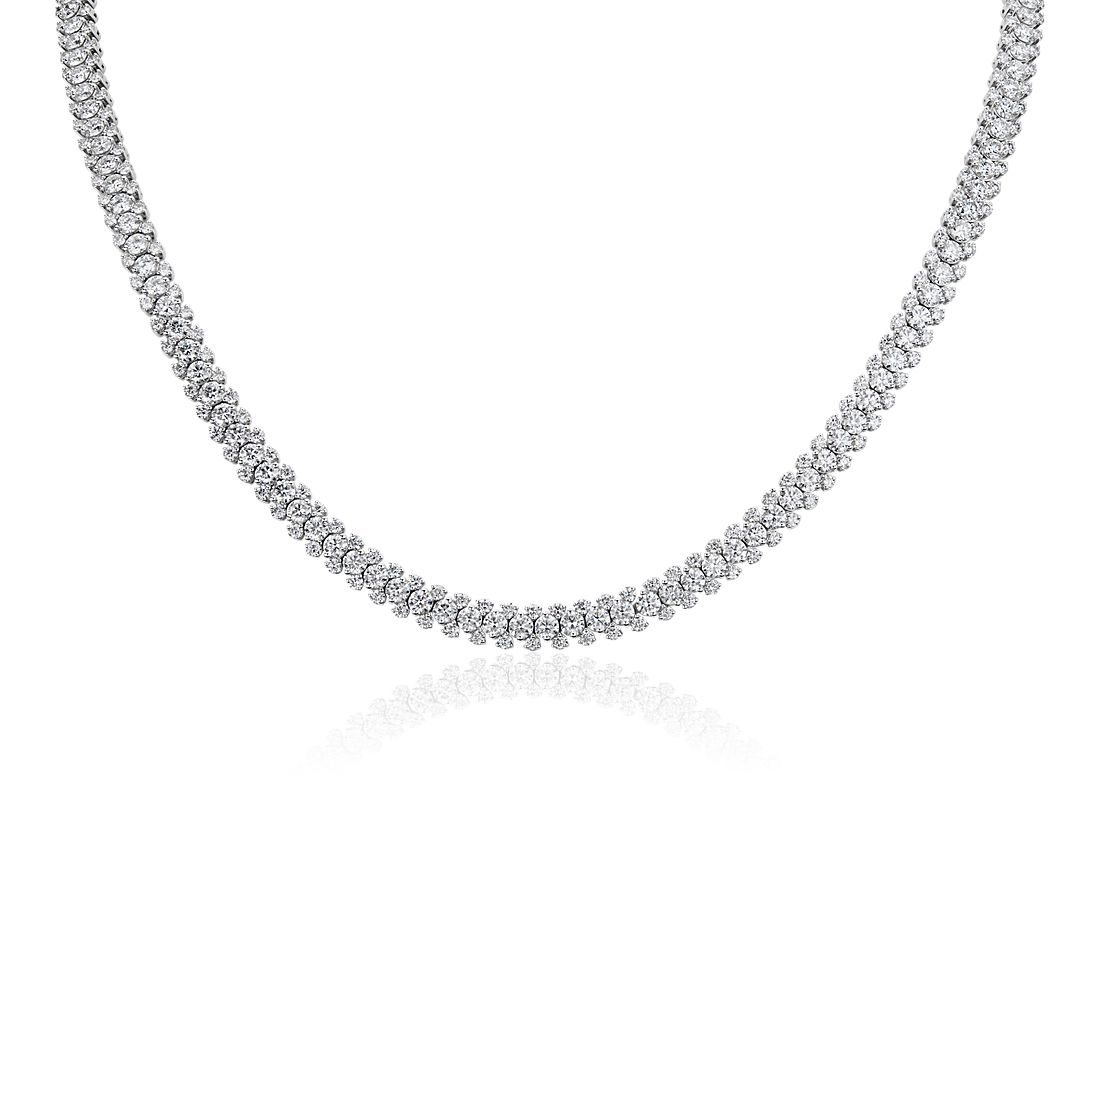 Garland Diamond Eternity Necklace in 14k White Gold (17 3/4 ct. tw.)